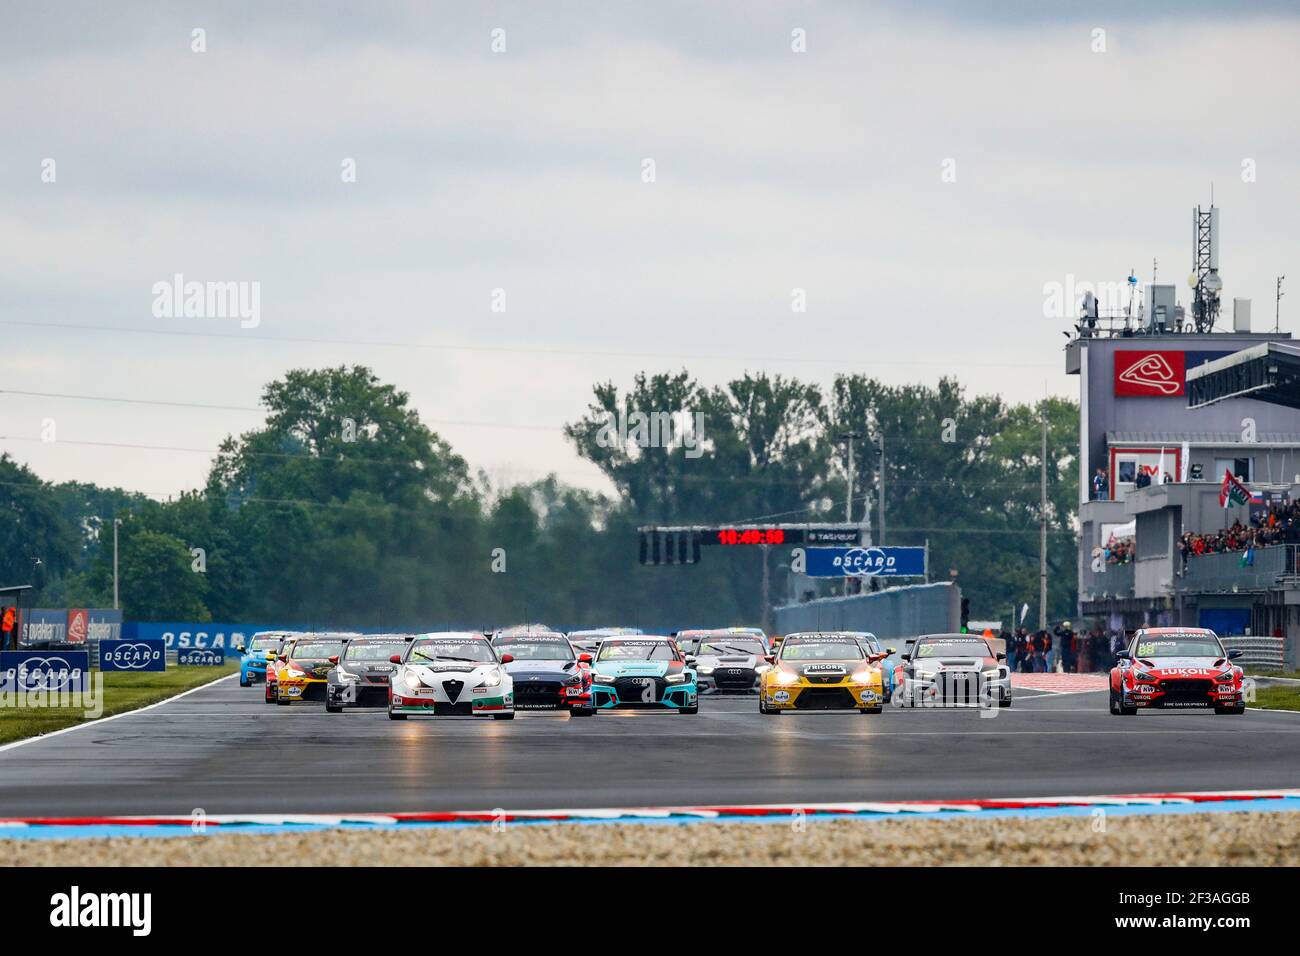 Start of Race 1: 55 MA QINGHUA, (CHINA), TEAM MULSANNE,ALFA ROMEO GIULIETTA TCR, 05 NORBERT MICHELISZ, (HUNGARY), BRC HYUNDAI N SQUADRA CORSE, HYUNDAI I30 N TCR, 69 JEAN-KARL VERNAY, (FRANCE), LEOPARD RACING TEAM AUDI SPORT,AUDI RS3 LMS, 50 TOM CORONEL, (NETHERLANDS), COMTOYOU RACING,CUPRA TCR, ac during the 2019 FIA WTCR World Touring Car cup race of Slovakia at Slovakia Ring, from may 10 to 12 - Photo Florent Gooden / DPPI Stock Photo